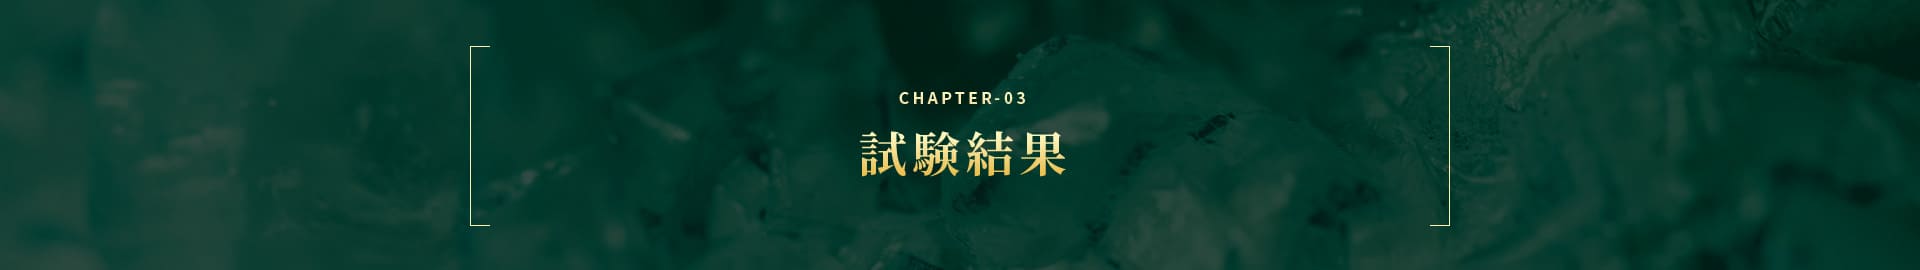 CHAPTER-03 試験結果